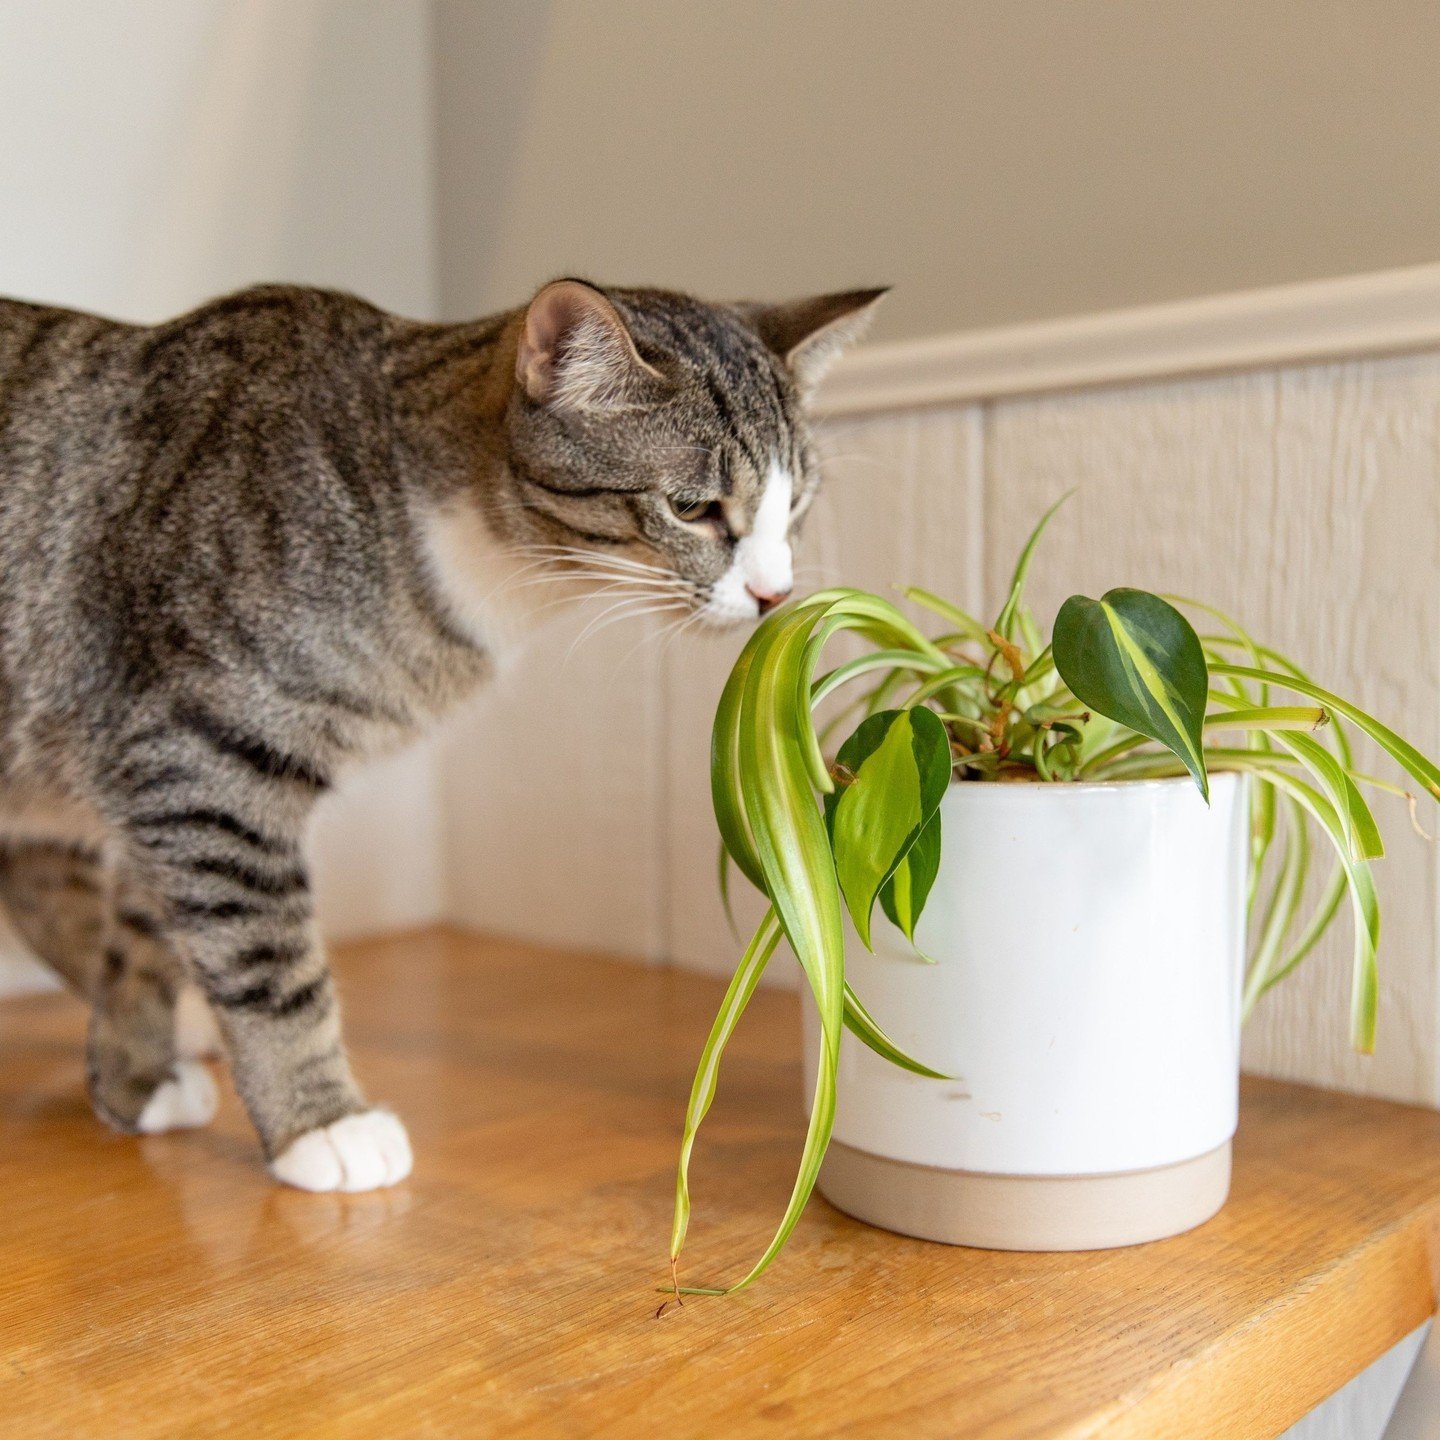 PLANTS FOR PAWS 🐾  Wednesday, May 15th 5PM-8PM at Gem City Catfe!⁠
⁠
Stop in the Catfe to purchase plants with 100% of the proceeds going to our nonprofit partner, Gem City Kitties! Together, both Gem City Catfe and Gem City Kitties work to improve 